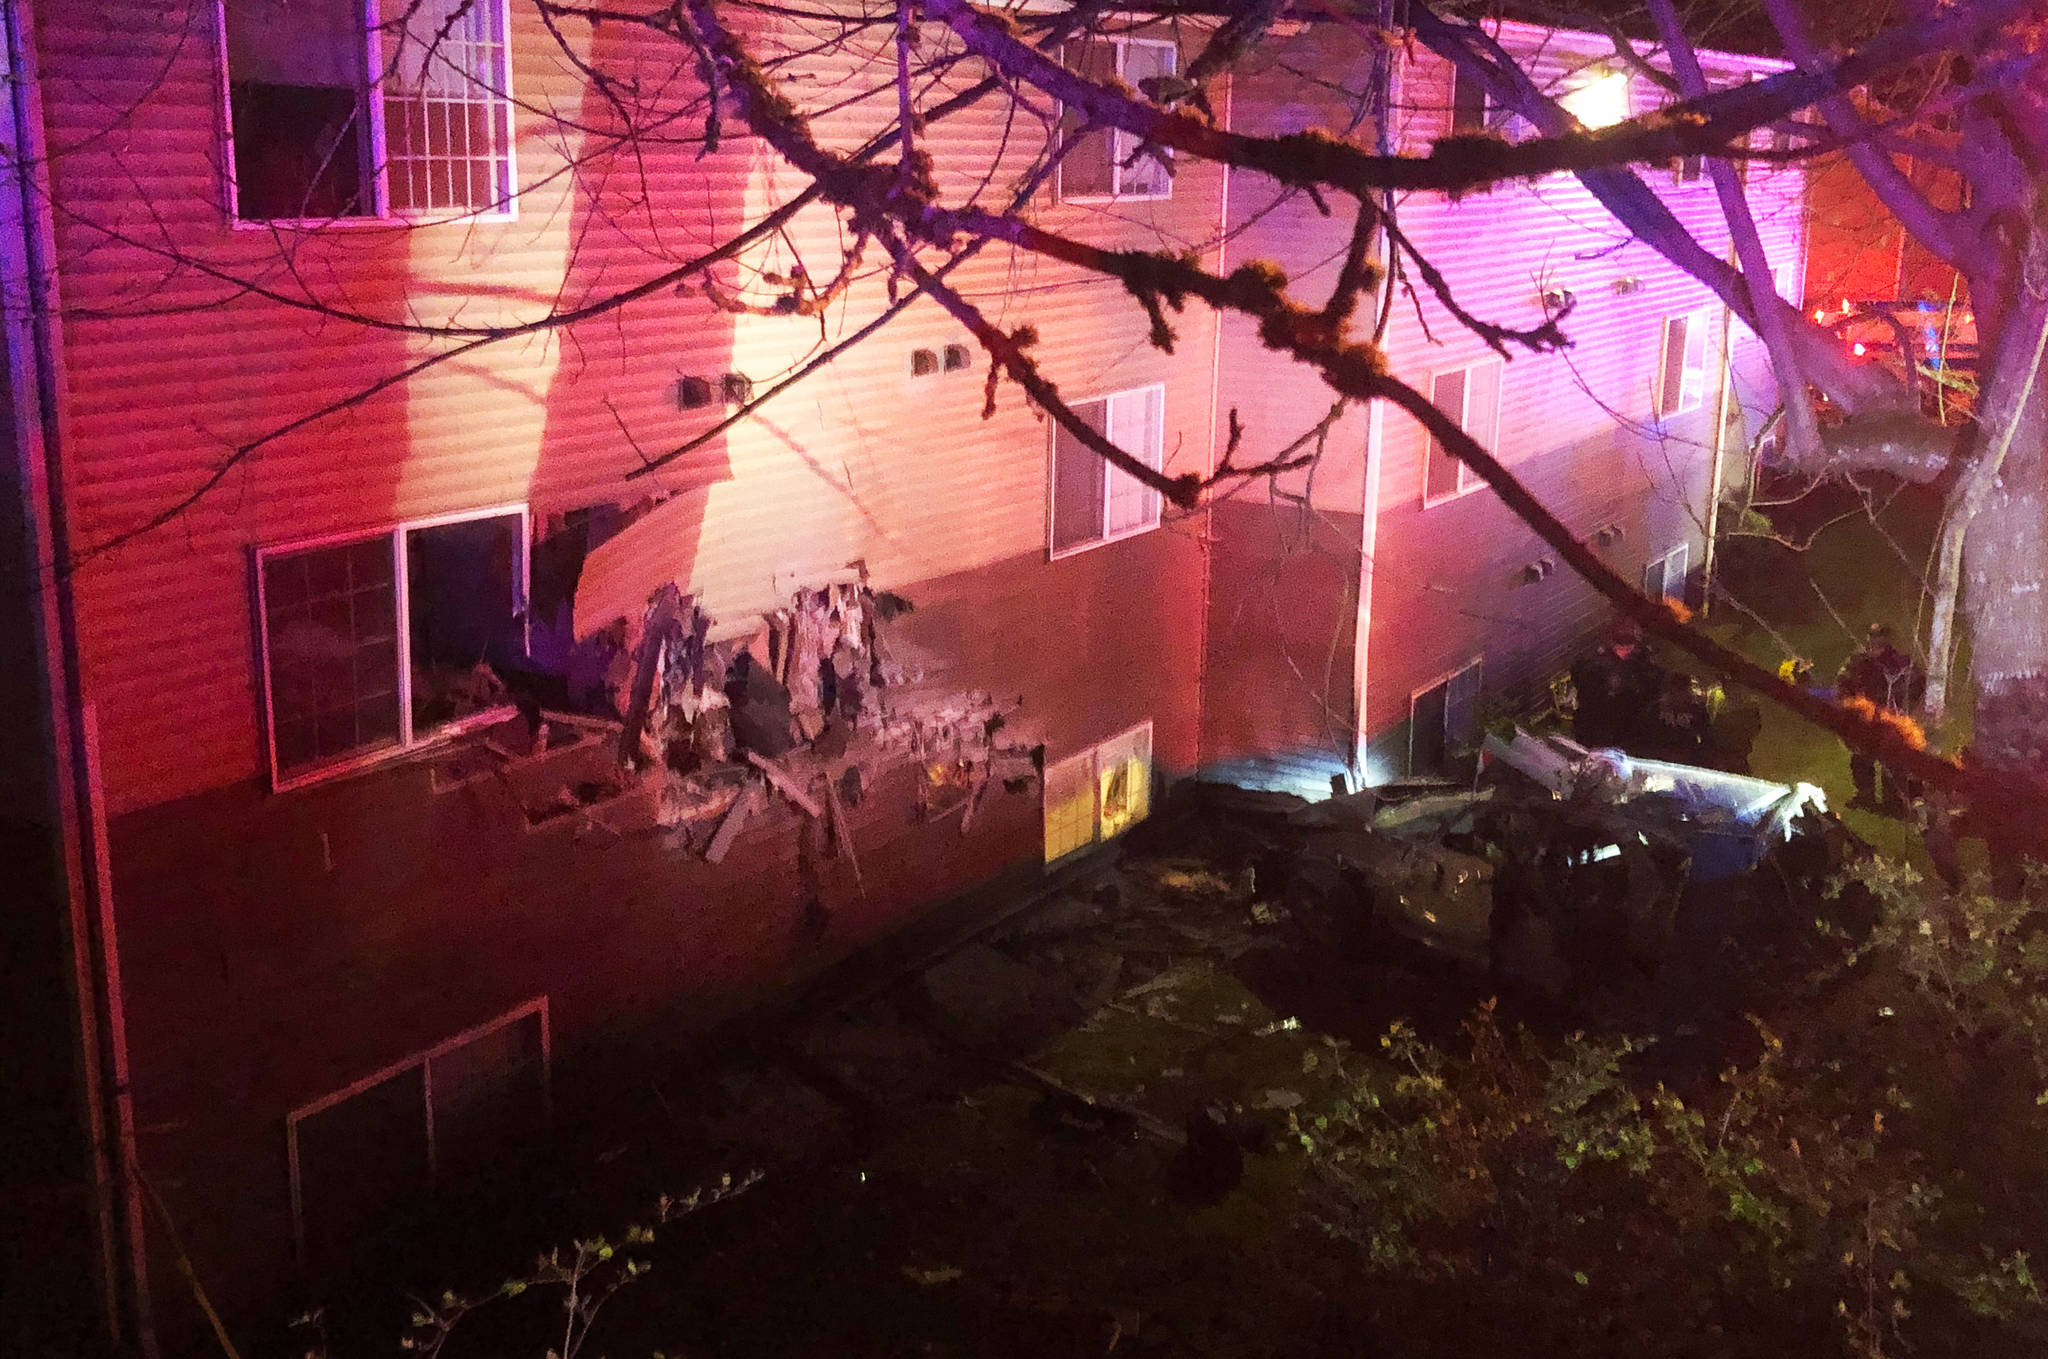 Six people were injured when a car crashed into an apartment building April 4 in Kent in the 8700 block of South 259th Street. COURTESY PHOTO, Puget Sound Fire